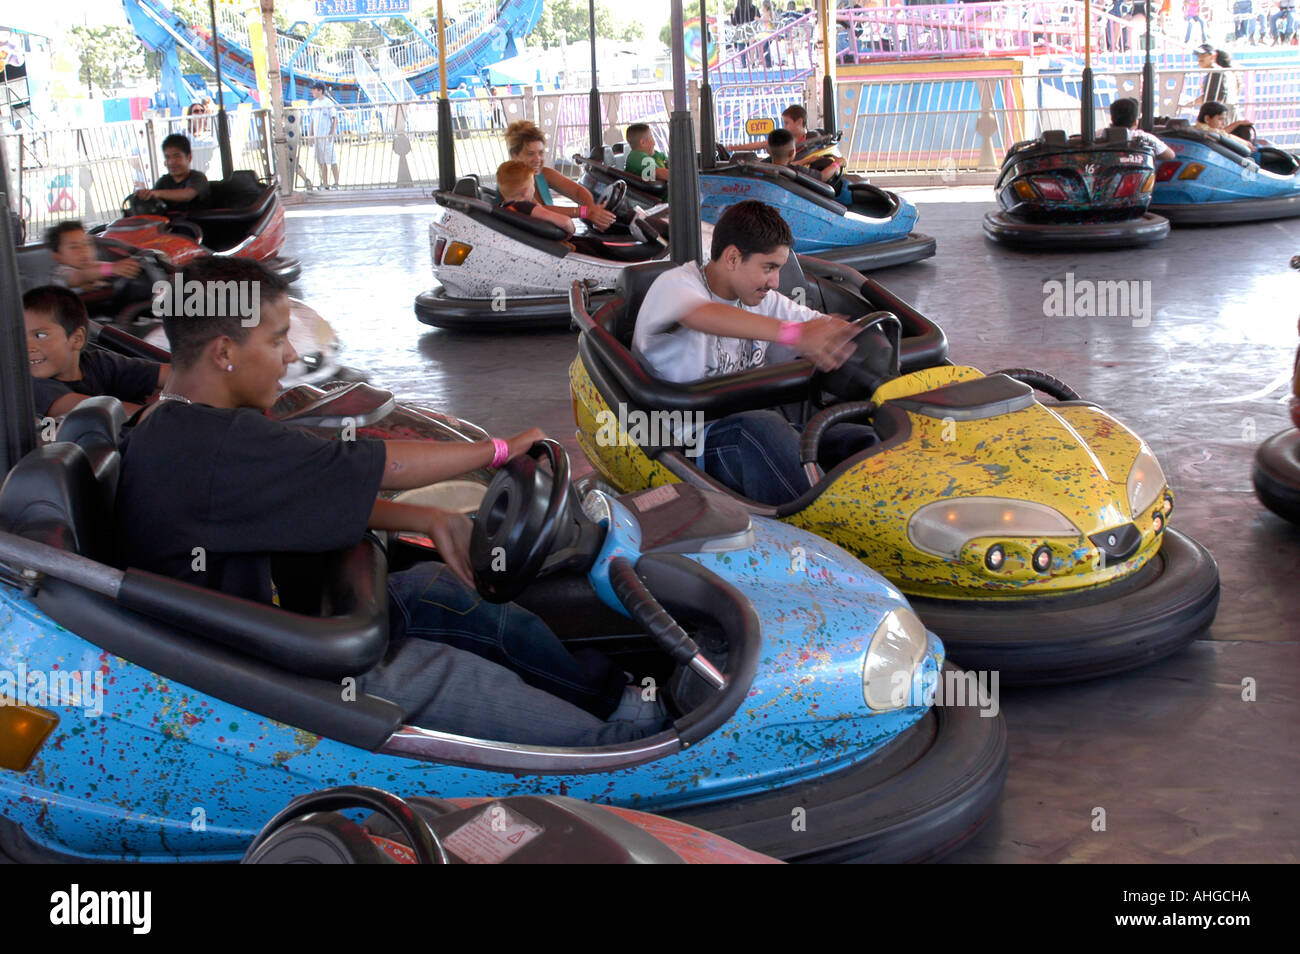 two teen age boys on Bumper cars collide at an amusement park in California Stock Photo